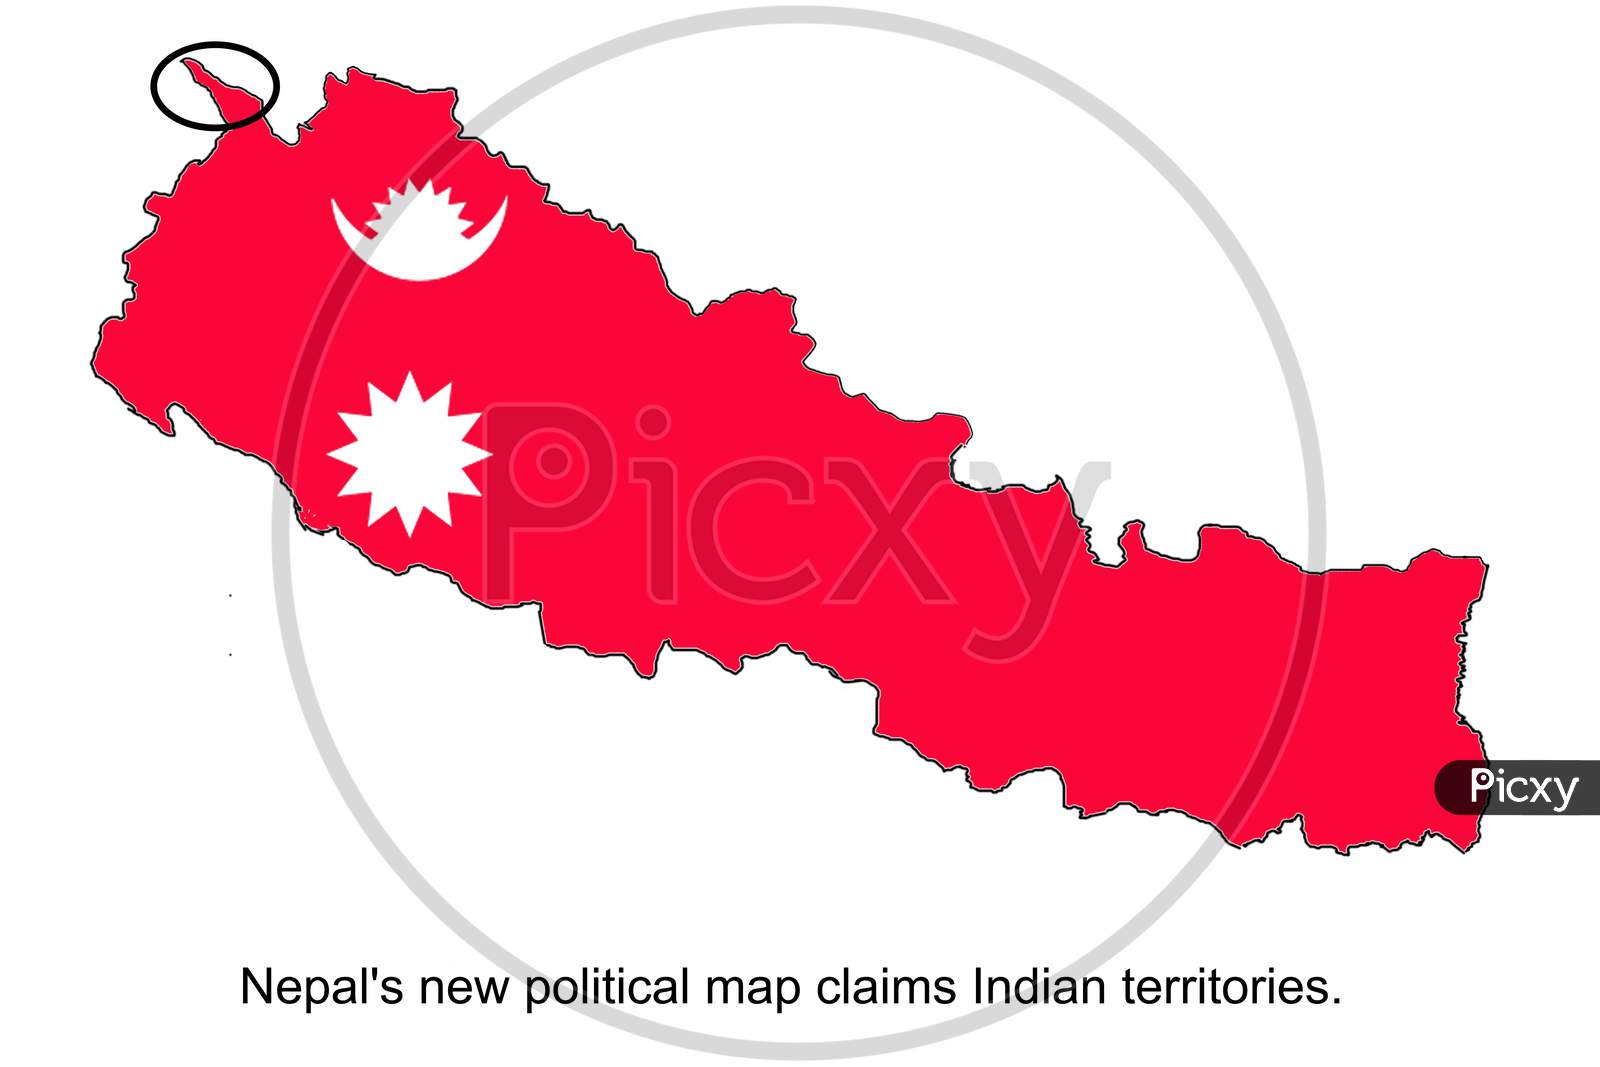 Nepal releases a new political map claiming Indian territories Kalapani, Lipulekh, Limpiyadhura as its own. India Nepal Border dispute. Both India Nepal claim them as integral part of their territory.